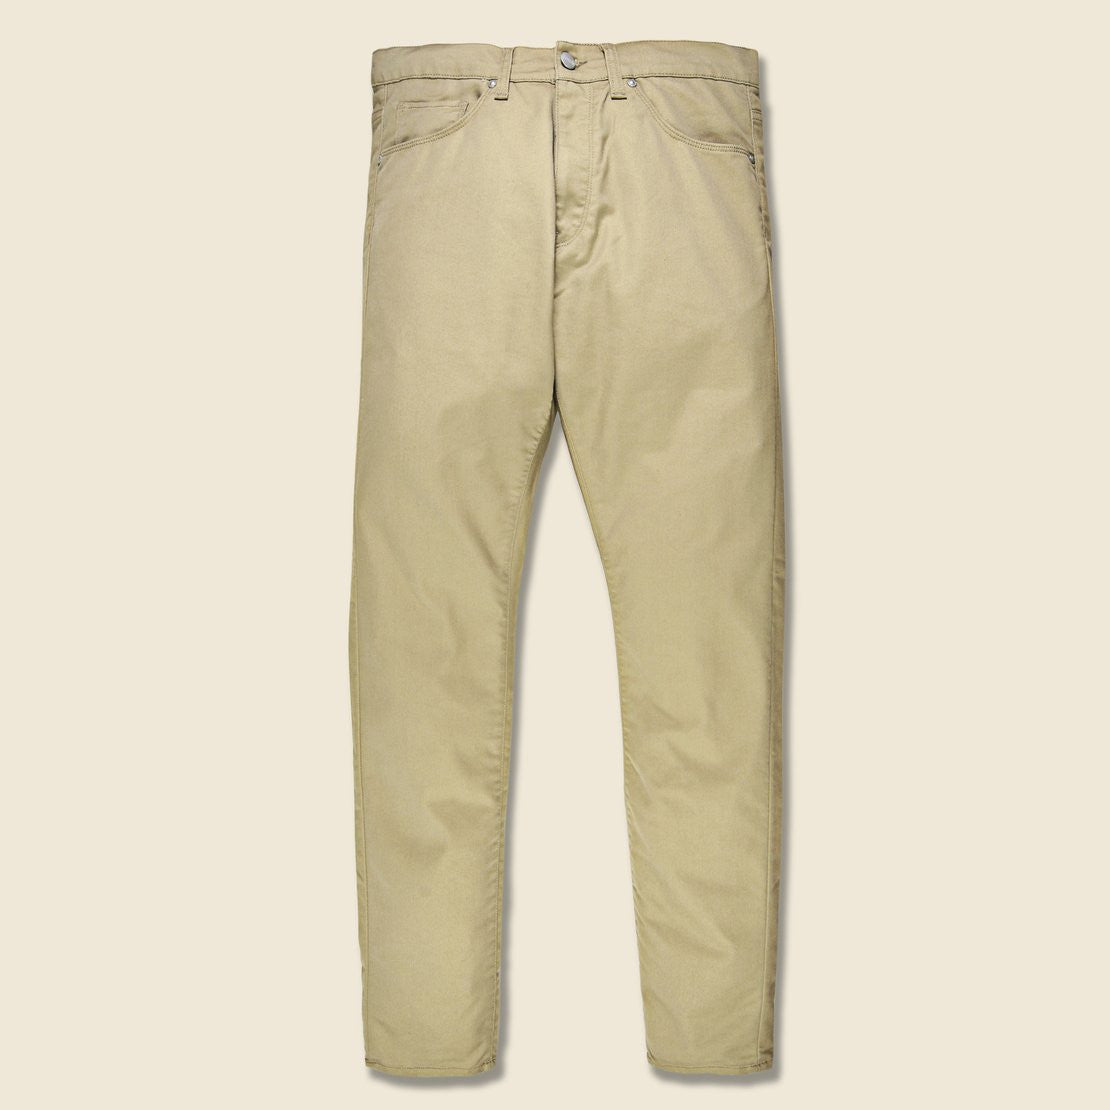 Carhartt WIP Vicious Pant - Leather